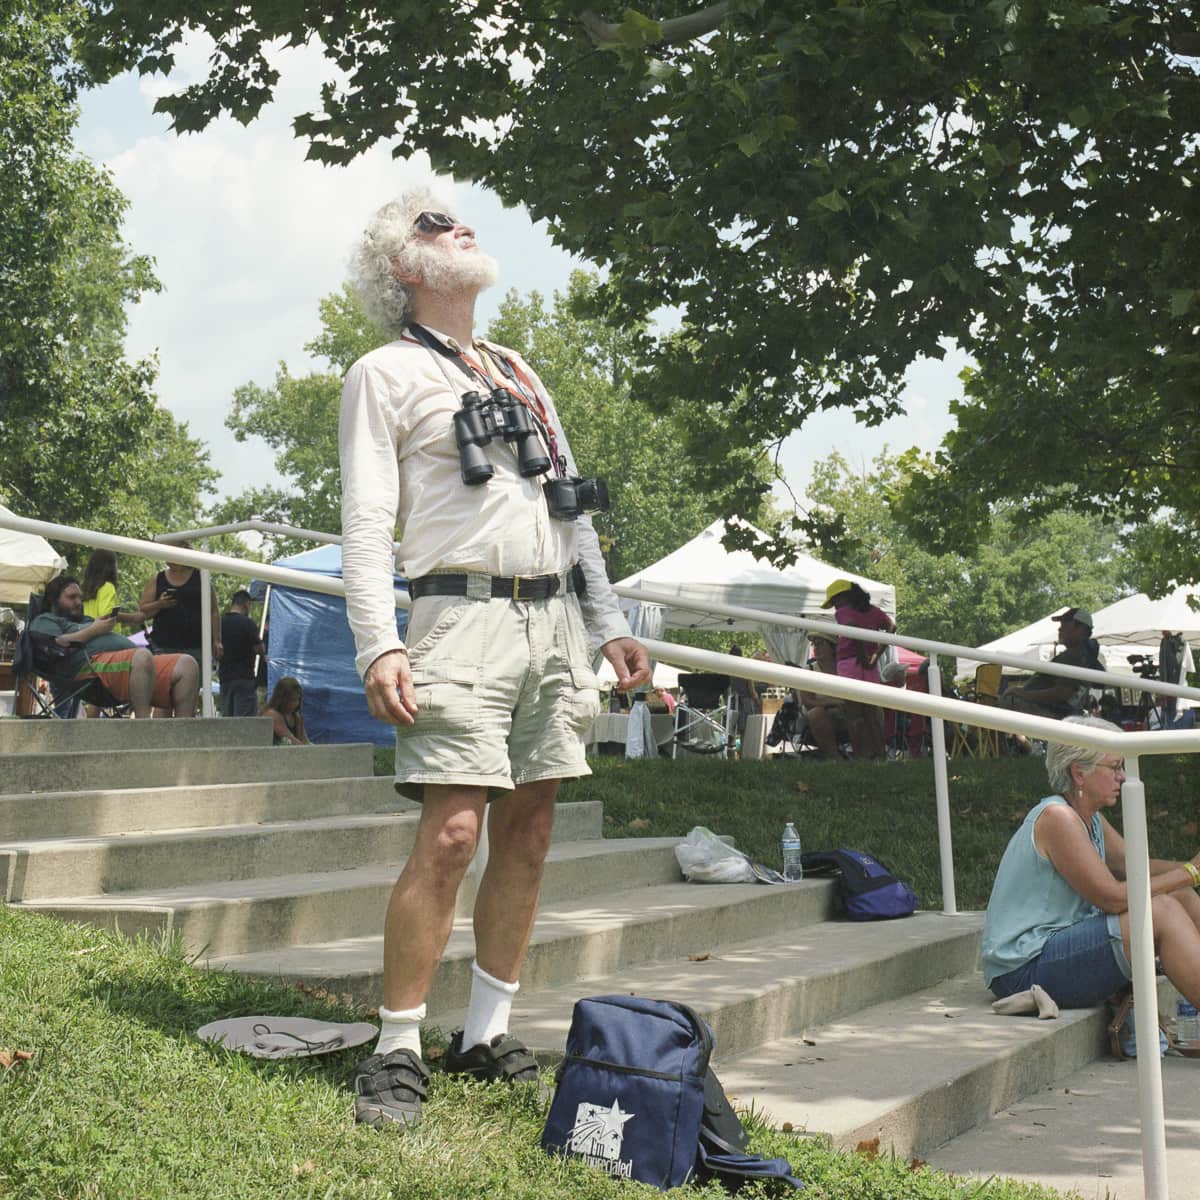 An analog portrait of man watching the solar eclipse at SIU in Carbondale, Illinois